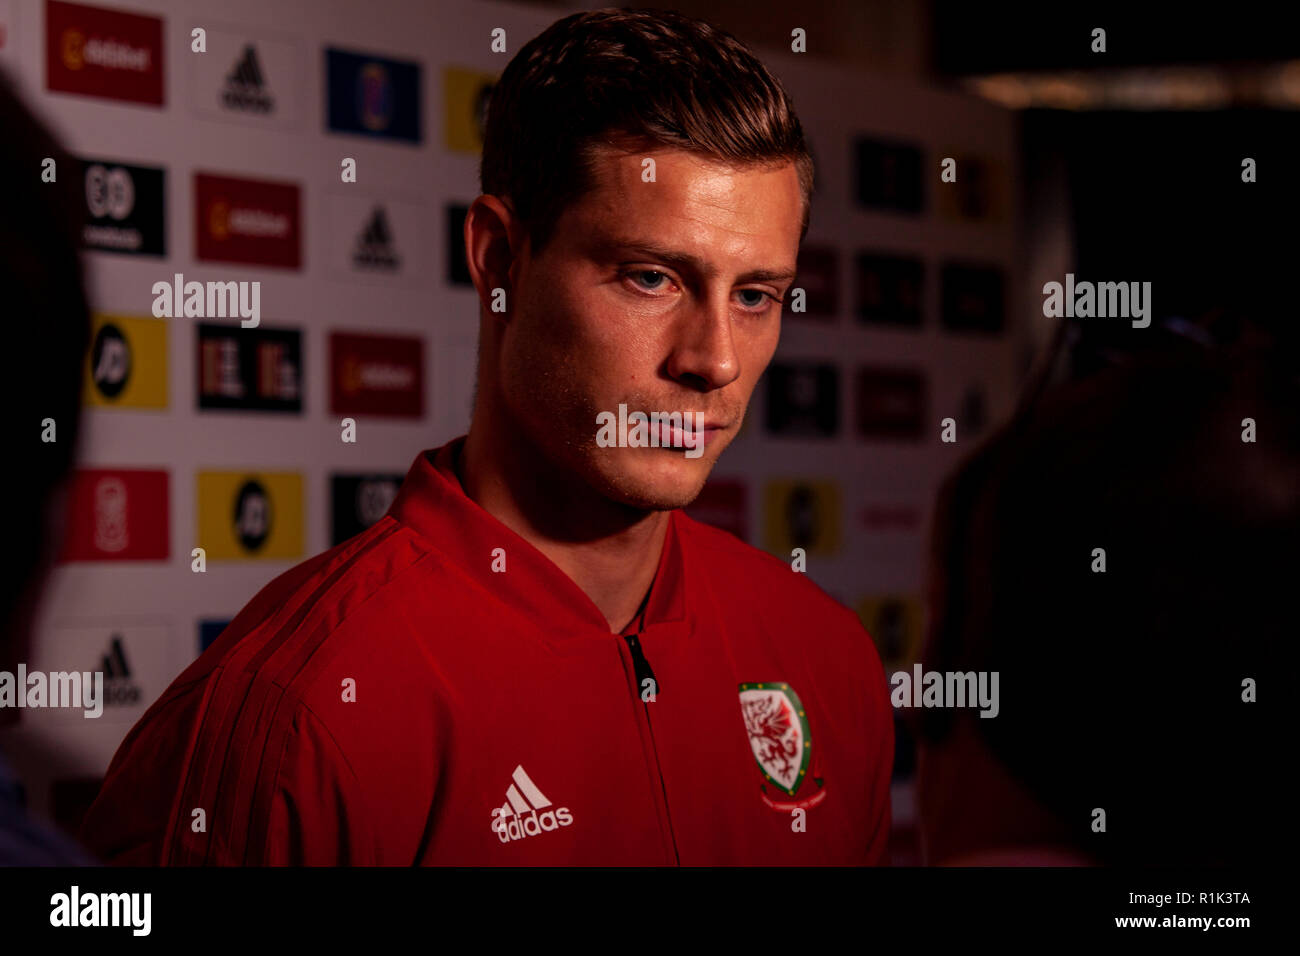 Cardiff, Wales. 13th November, 2018. Wales player James Lawrence faces the media ahead of the match against Denmark in the UEFA Nations League. Lewis Mitchell/YCPD. Credit: Lewis Mitchell/Alamy Live News Stock Photo